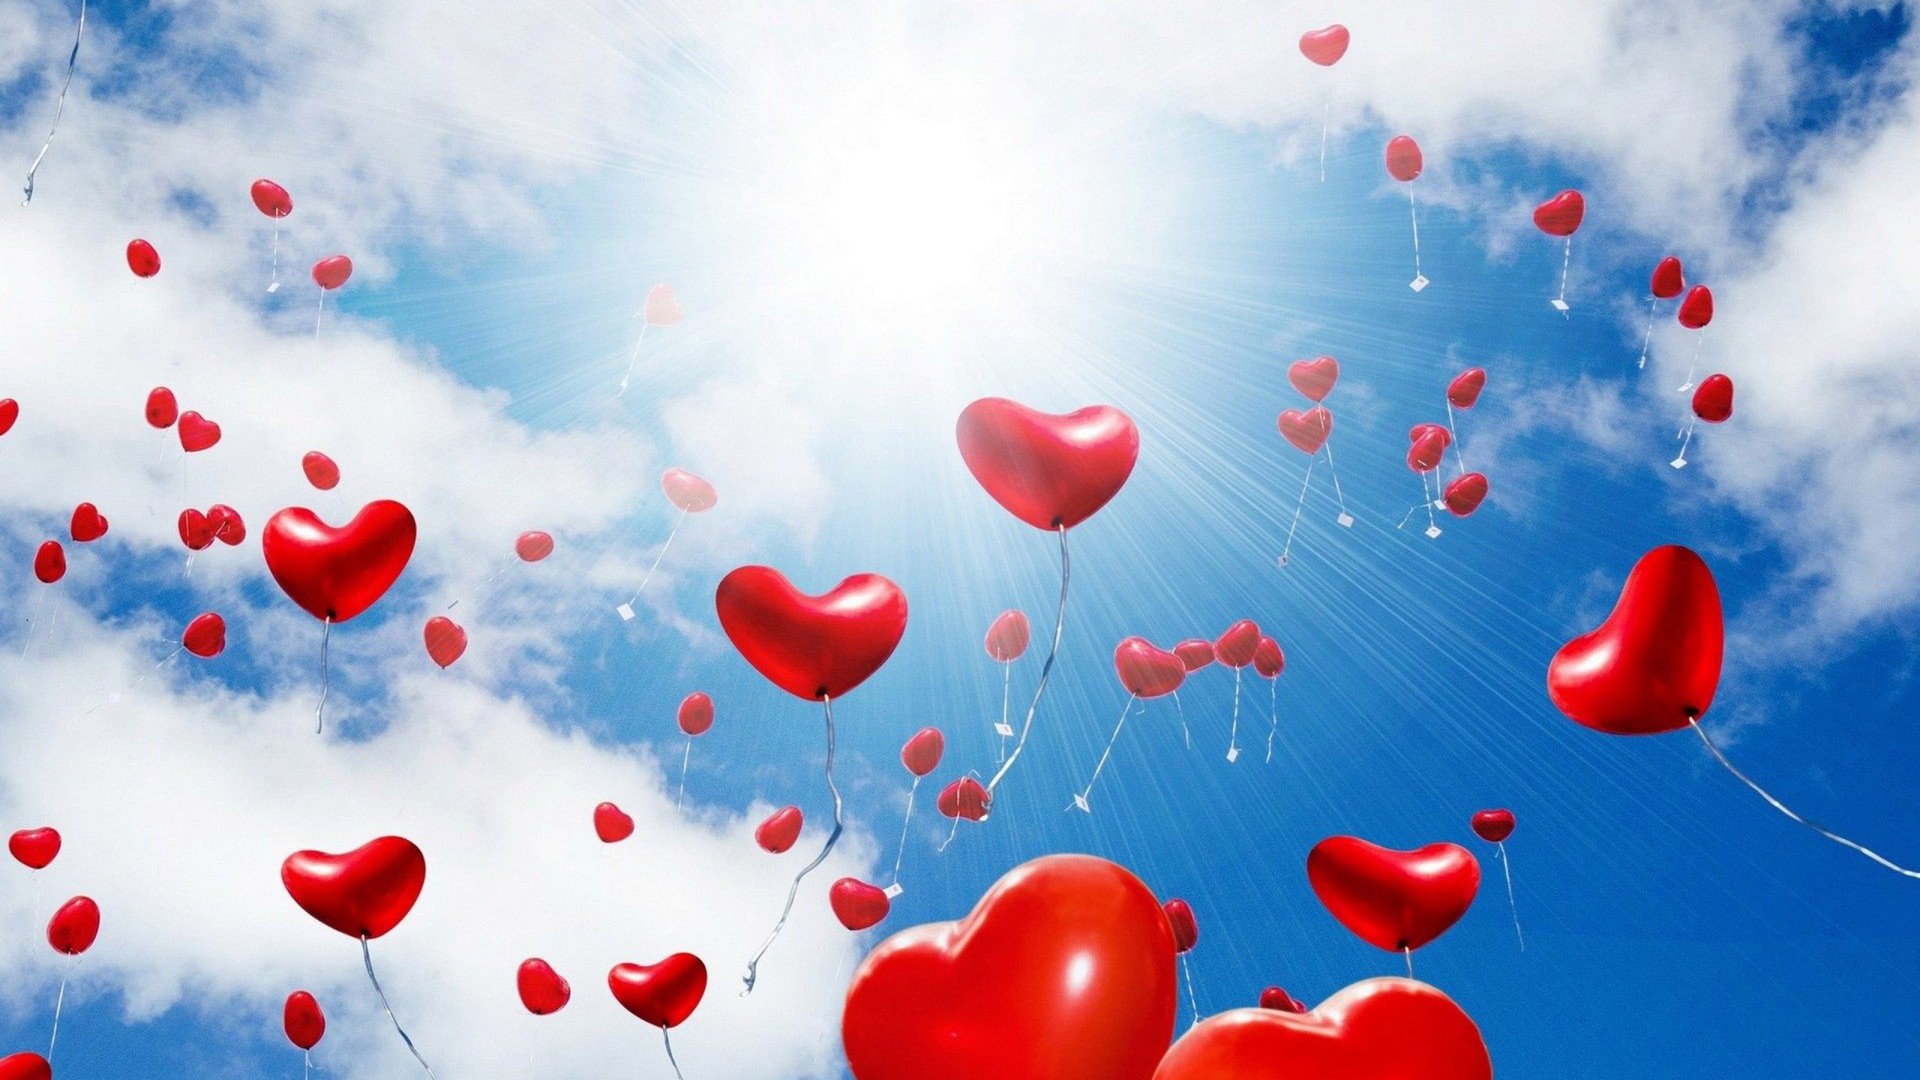 Red Balloons In The Shape Of A Heart Sunlight Blue Sky